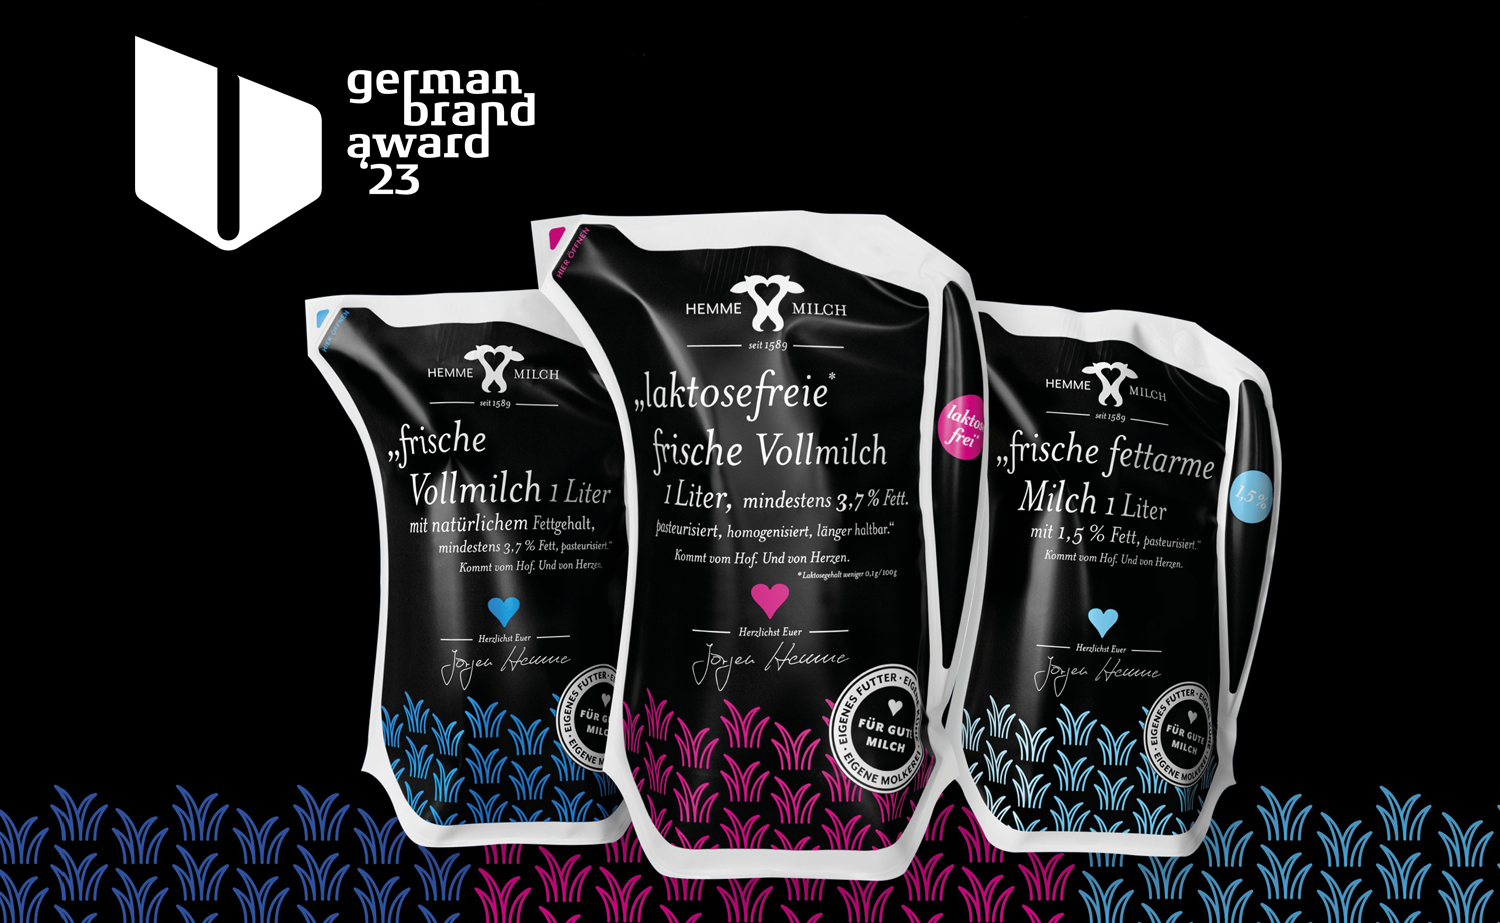 Hemme Milch wins German Brand Award 2023, in the Product Brand of the Year category with Ecolean’s packages